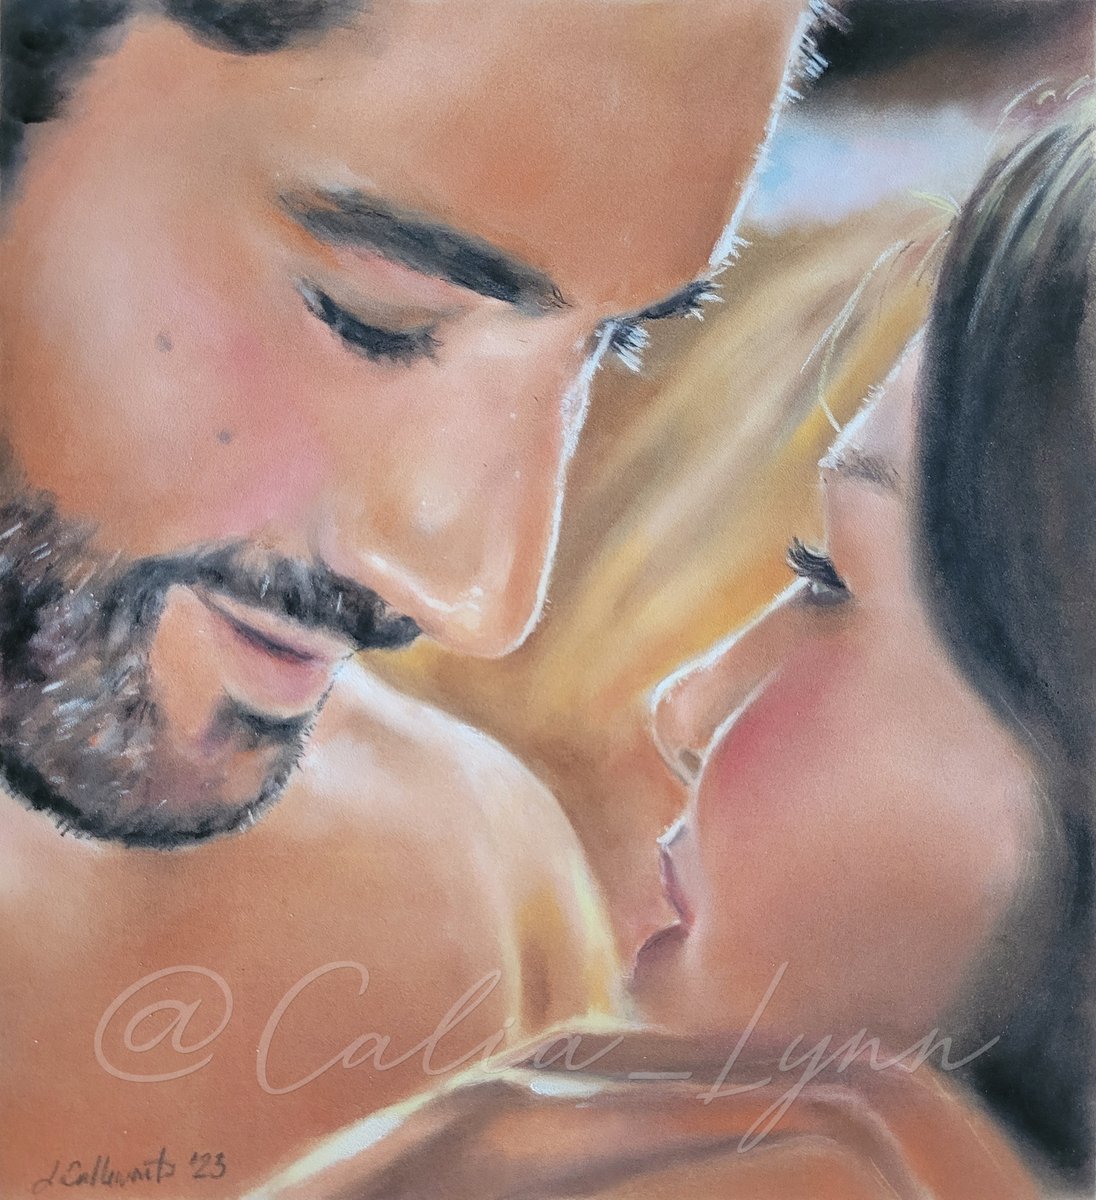 Better late than never.... this was supposed to be my Valentine's Day tweet.    Inspired by this beautiful gif by @neuralcluster.  #Deckerstar #Luciferfanart #LuciferMorningstar #ChloeDecker #TomEllis #LaurenGerman #Kiss #Luciferfanarat #traditionalart #softpastels #panpastels